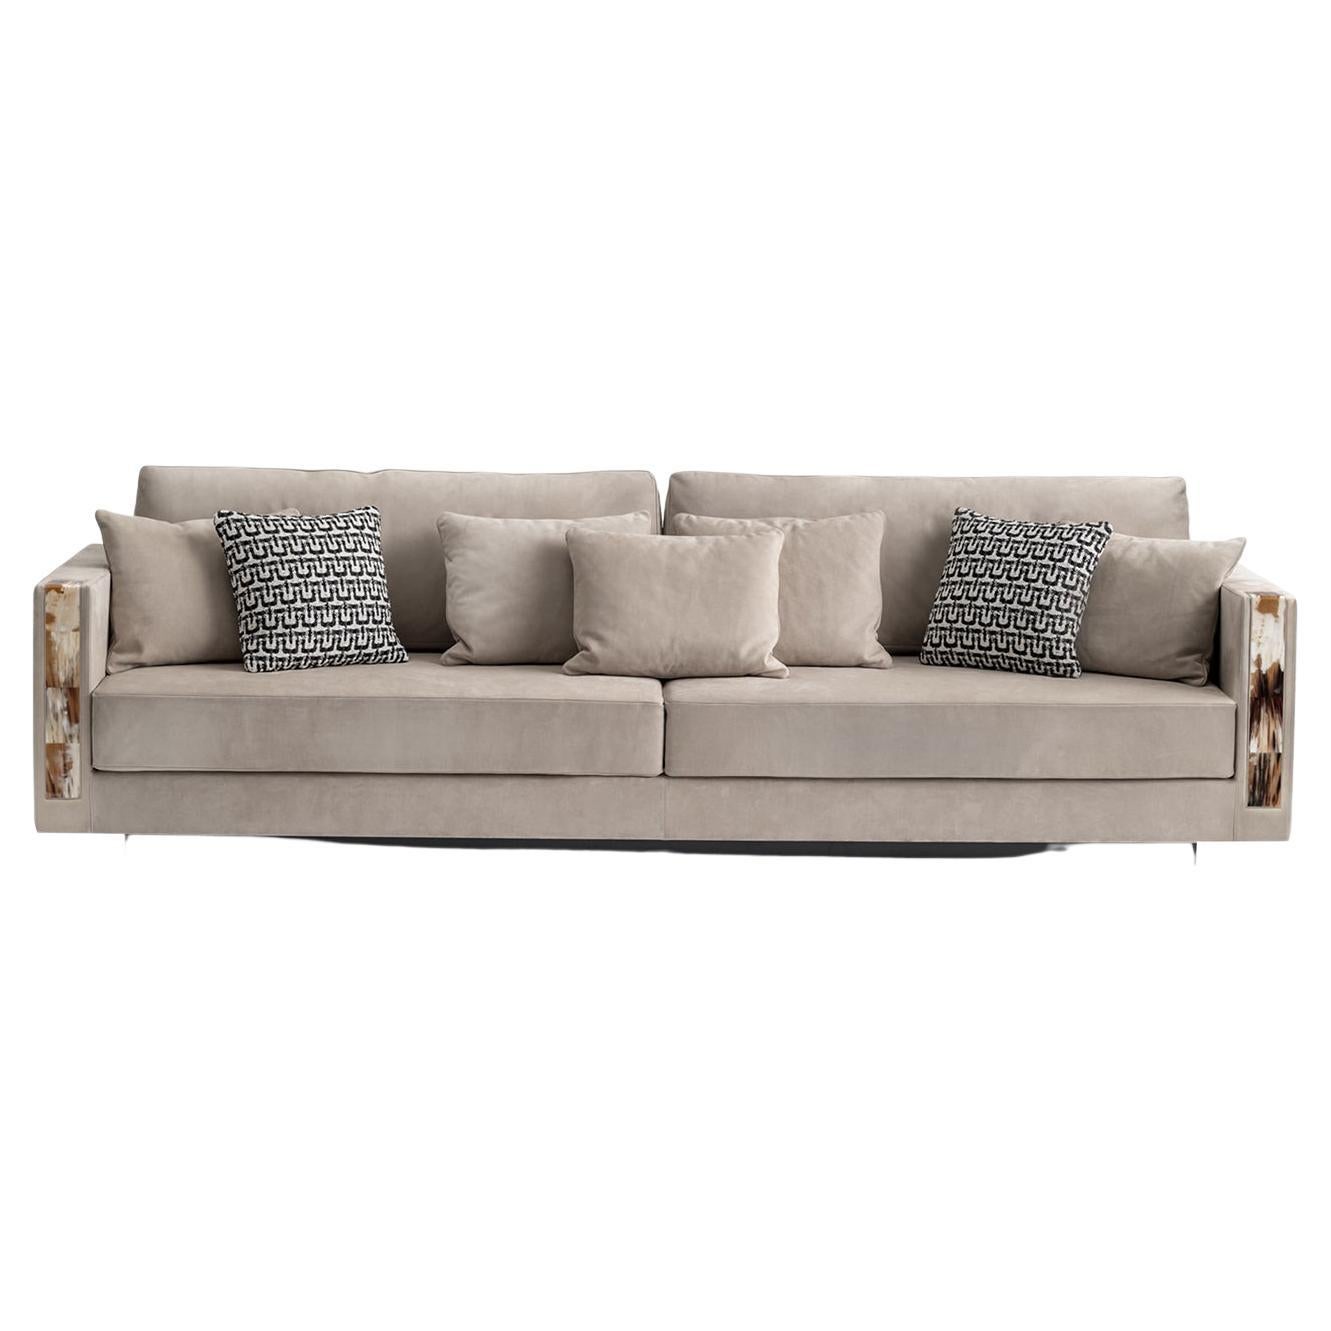 Zeus 4-Seater Beige Sofa with Horn Inlays For Sale